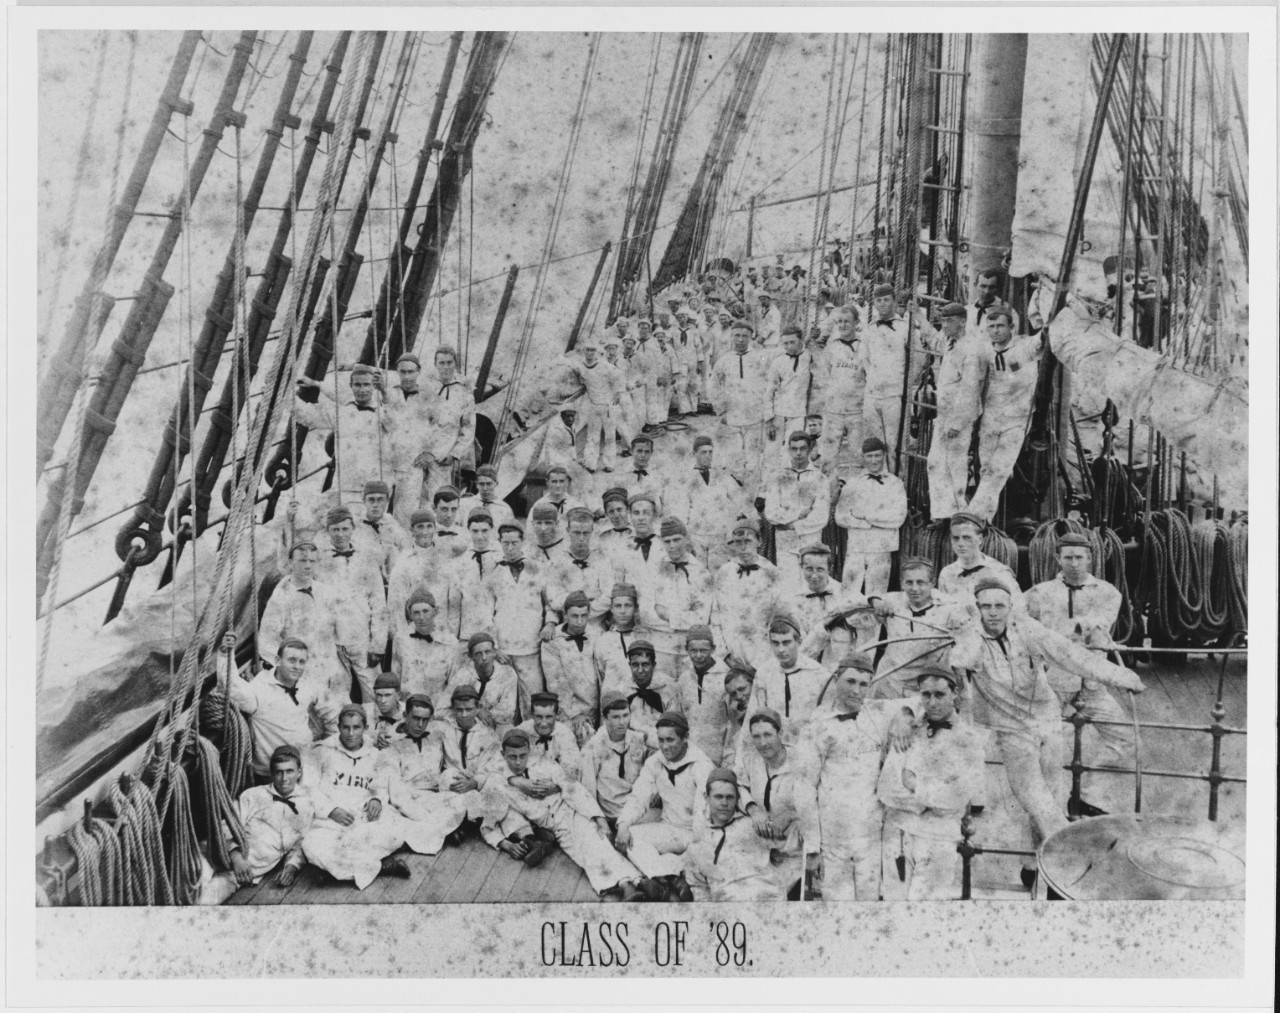 USS CONSTELLATION (1855-1955), Third Class Cadets in 1886.